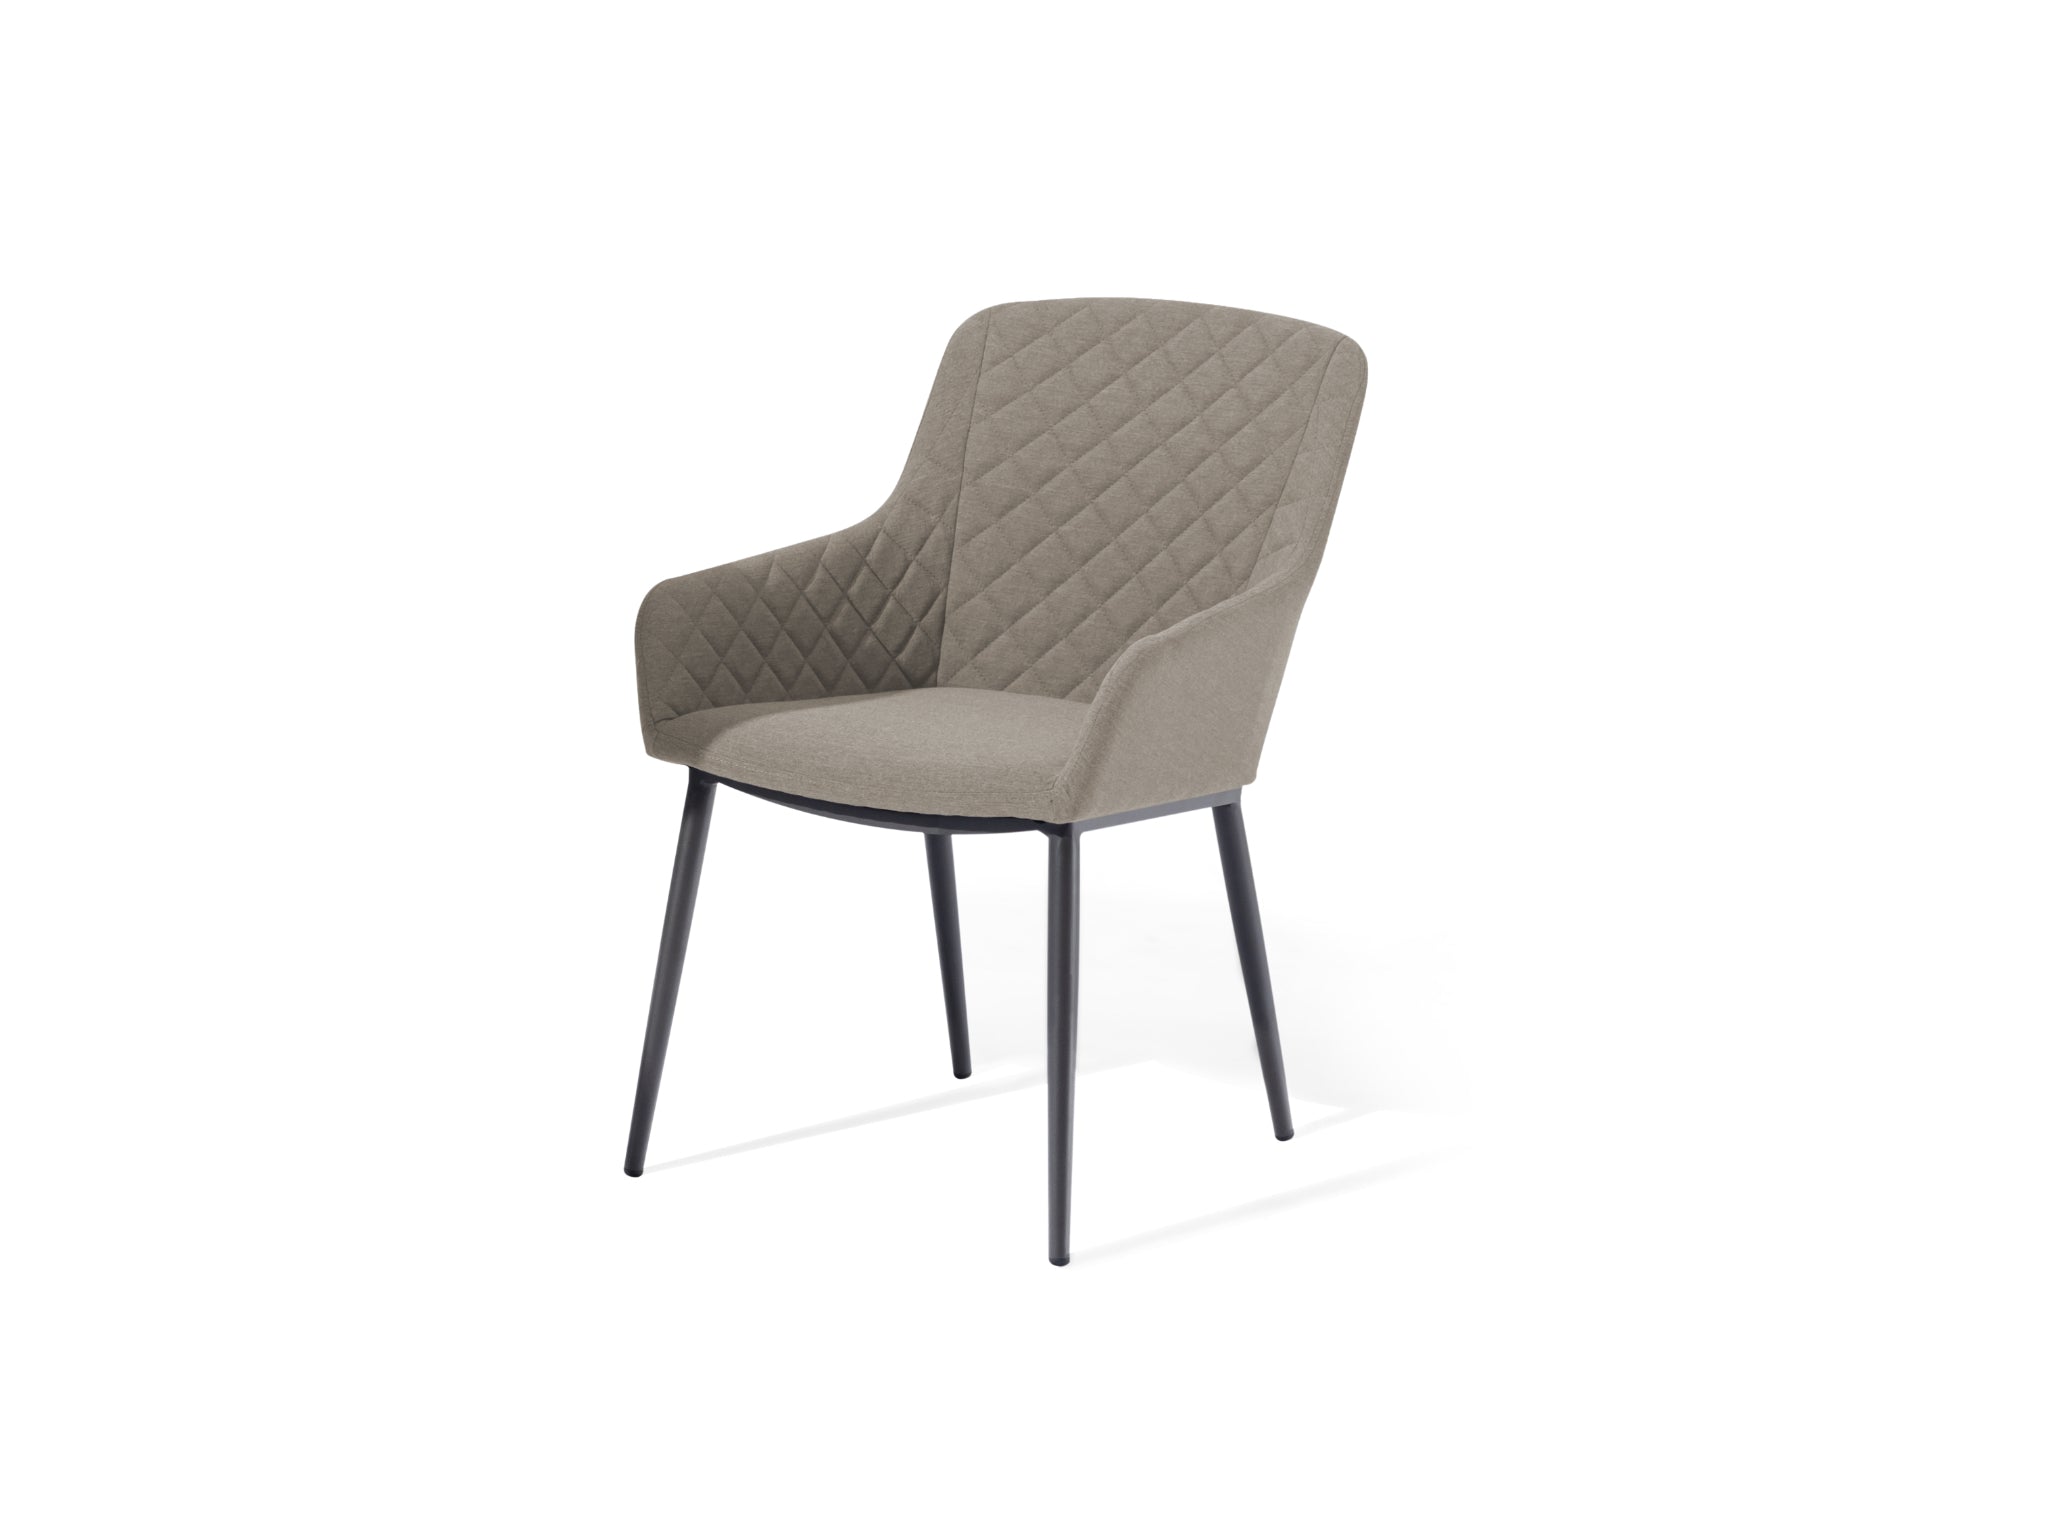 SIMPO by Sunlongarden Zest Dining Chair